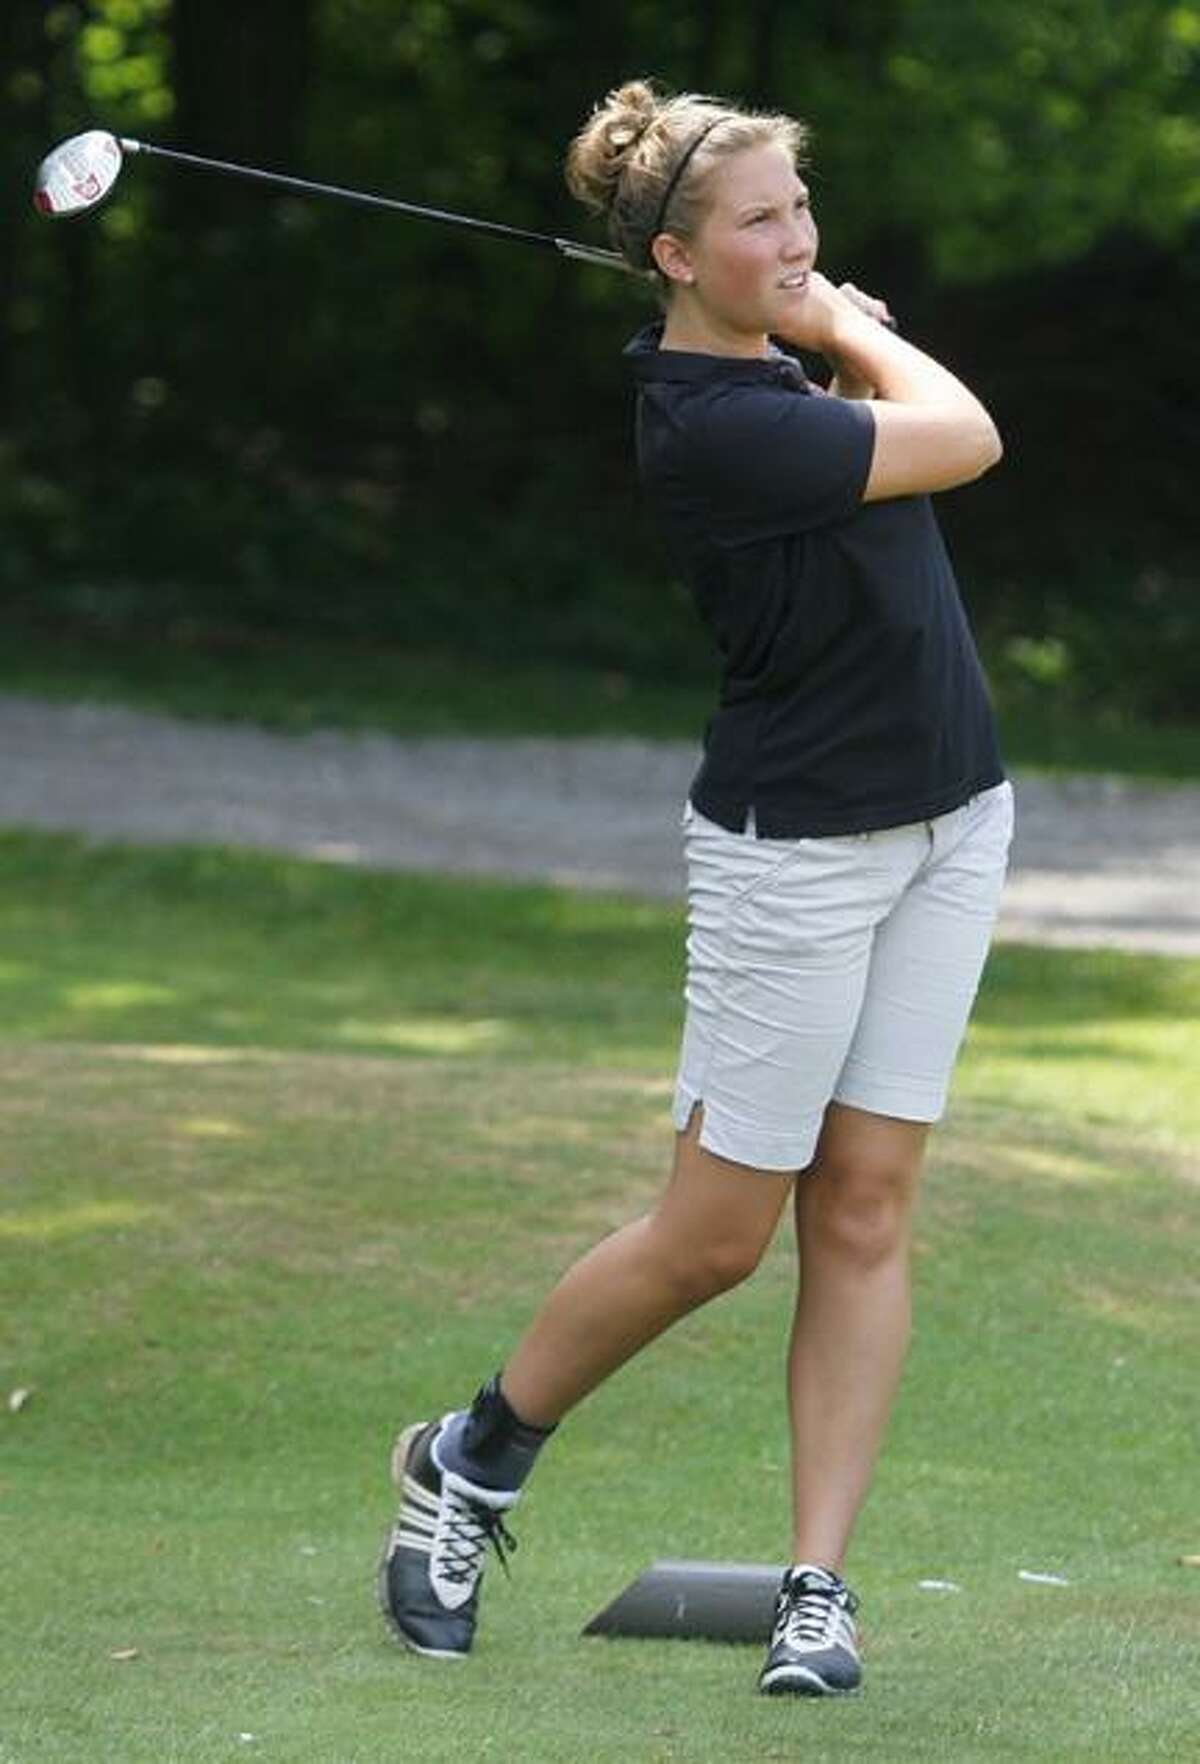 Dispatch Staff Photo by JOHN HAEGER (Twitter.com/OneidaPhoto)Amanda Snizek watches her tee shot on the sixth hole during the Mohawk Valley Junior Golf Tour match at Stonebridge Golf and Country Club on Tuesday, July 17, 2012.